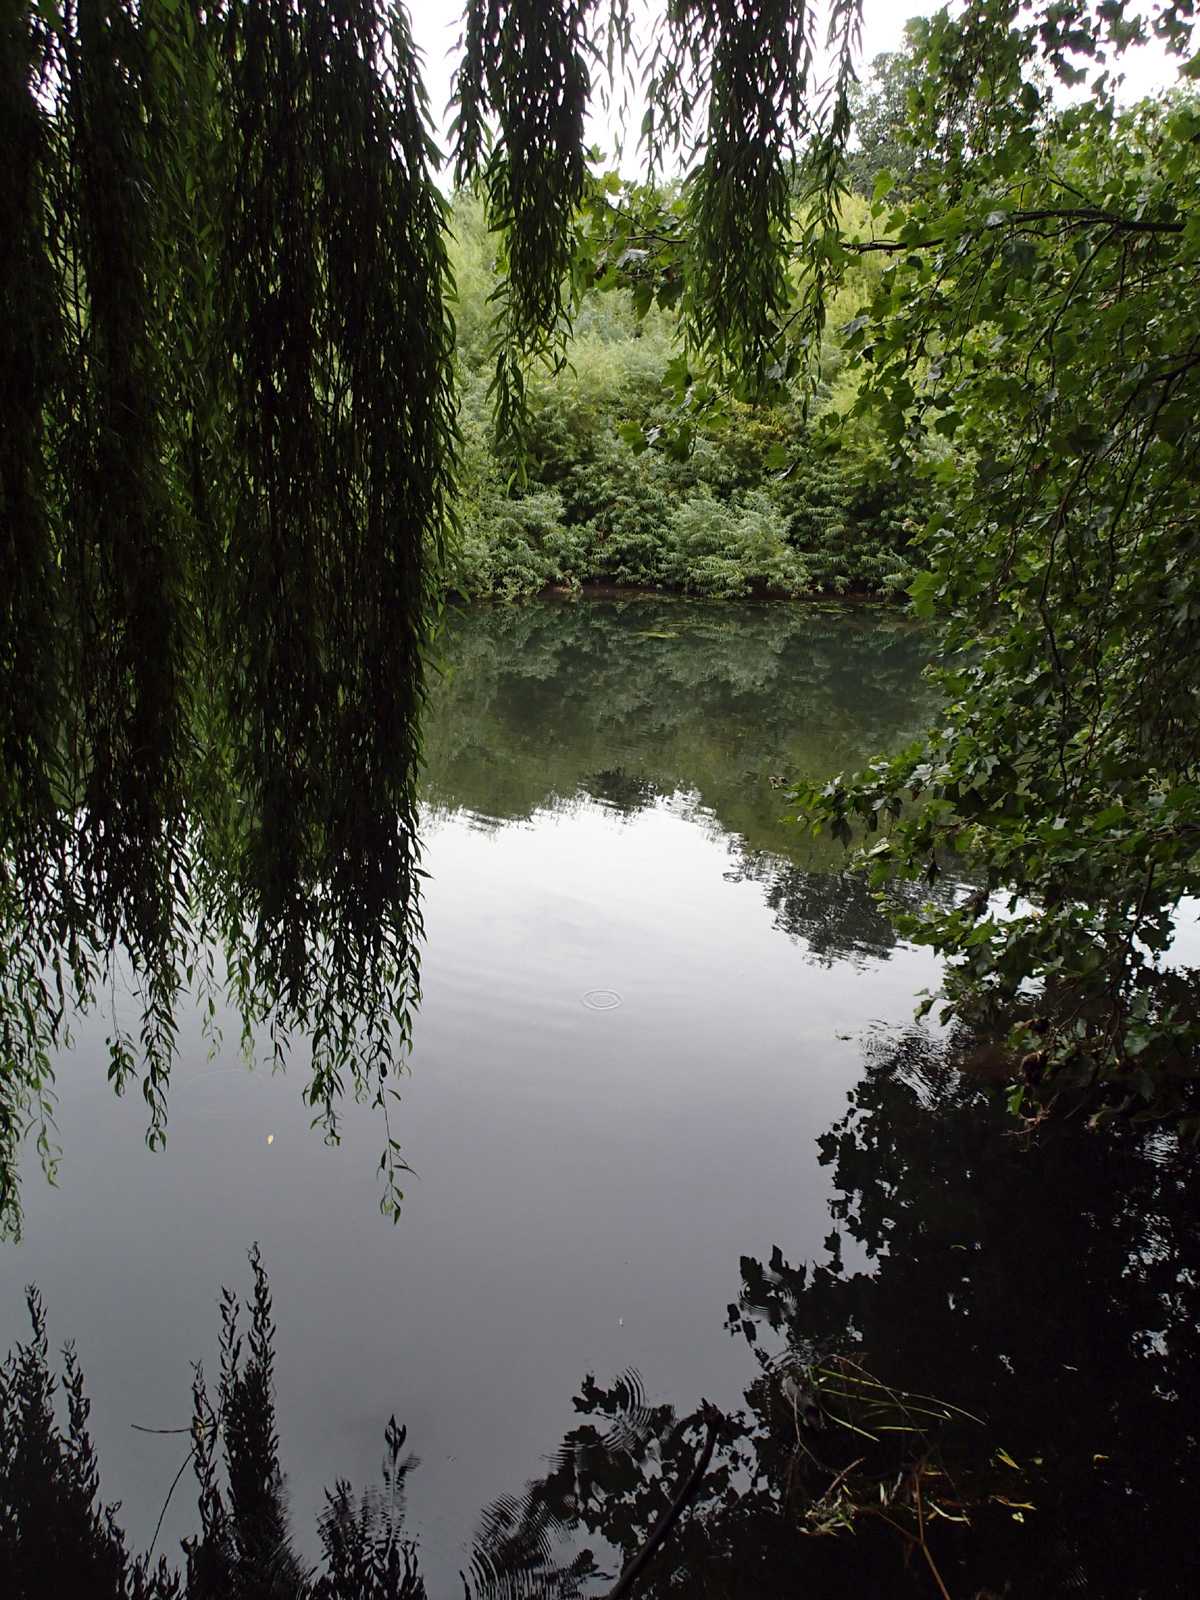 looking through weeping willow at river and vegetation opposite, both reflected in water